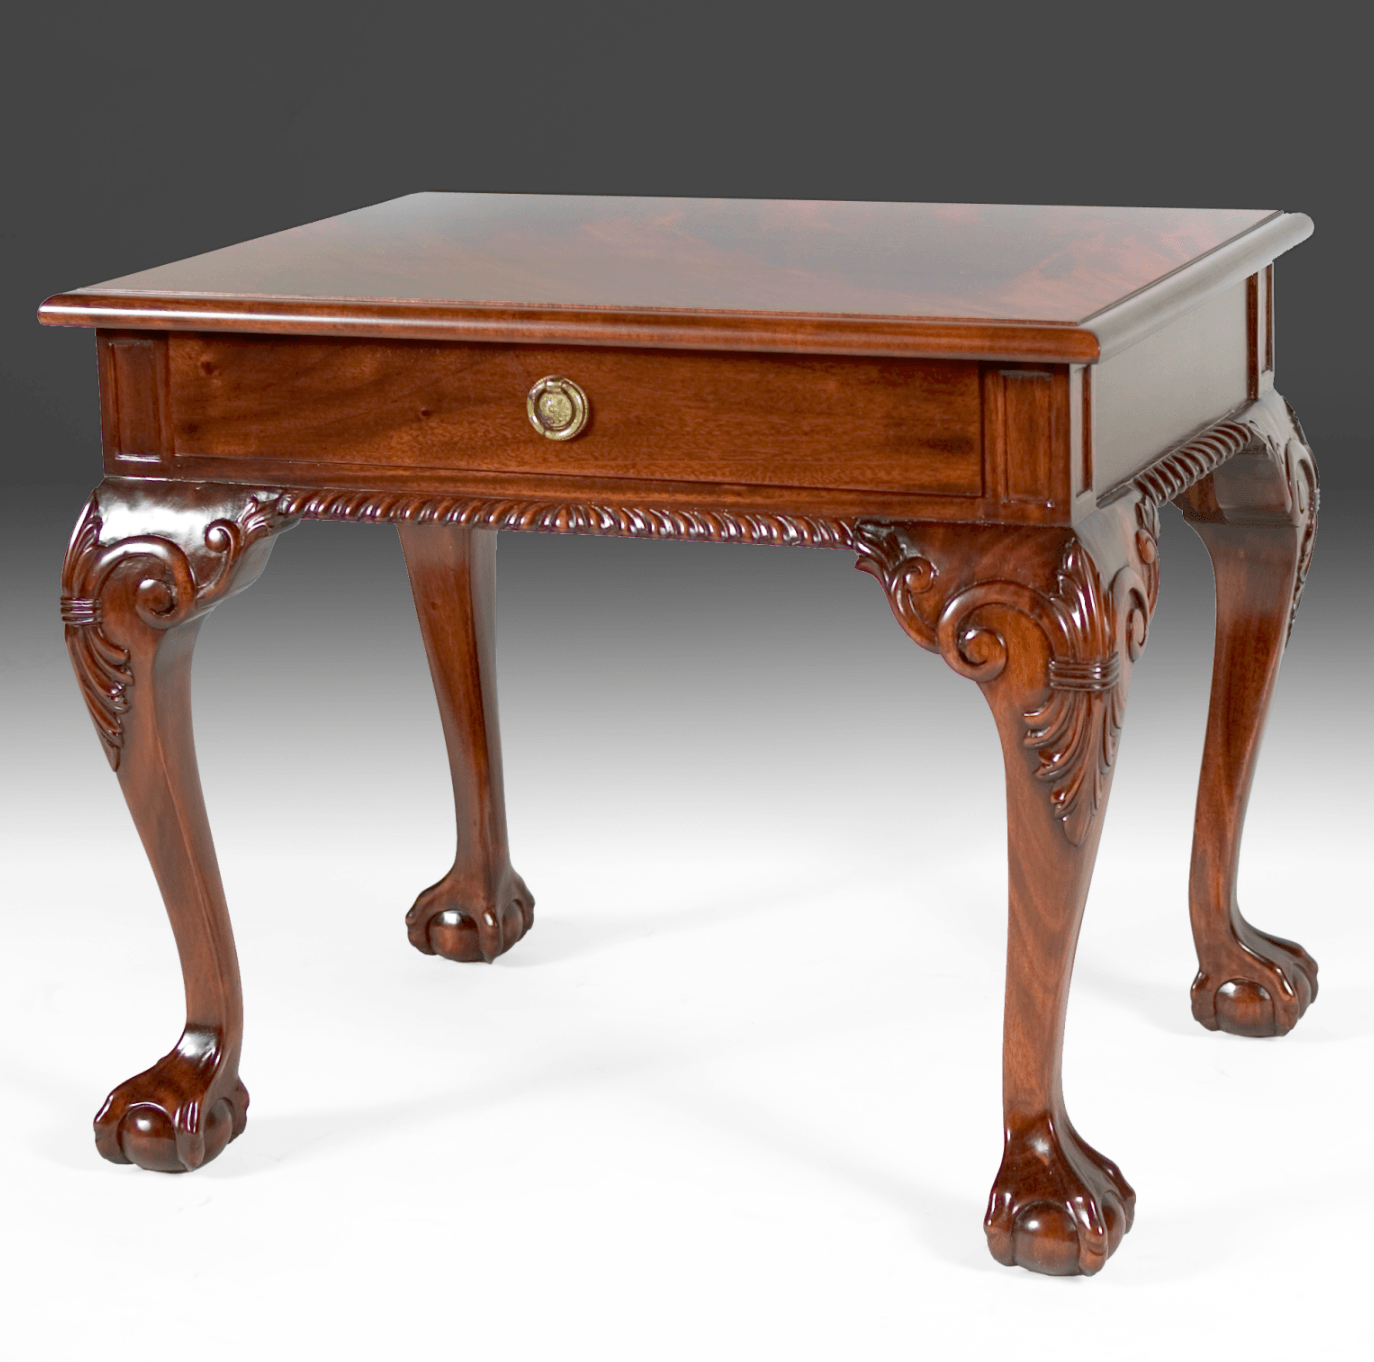 CHIPPENDALE END TABLE WITH DRAWER - House of Chippendale